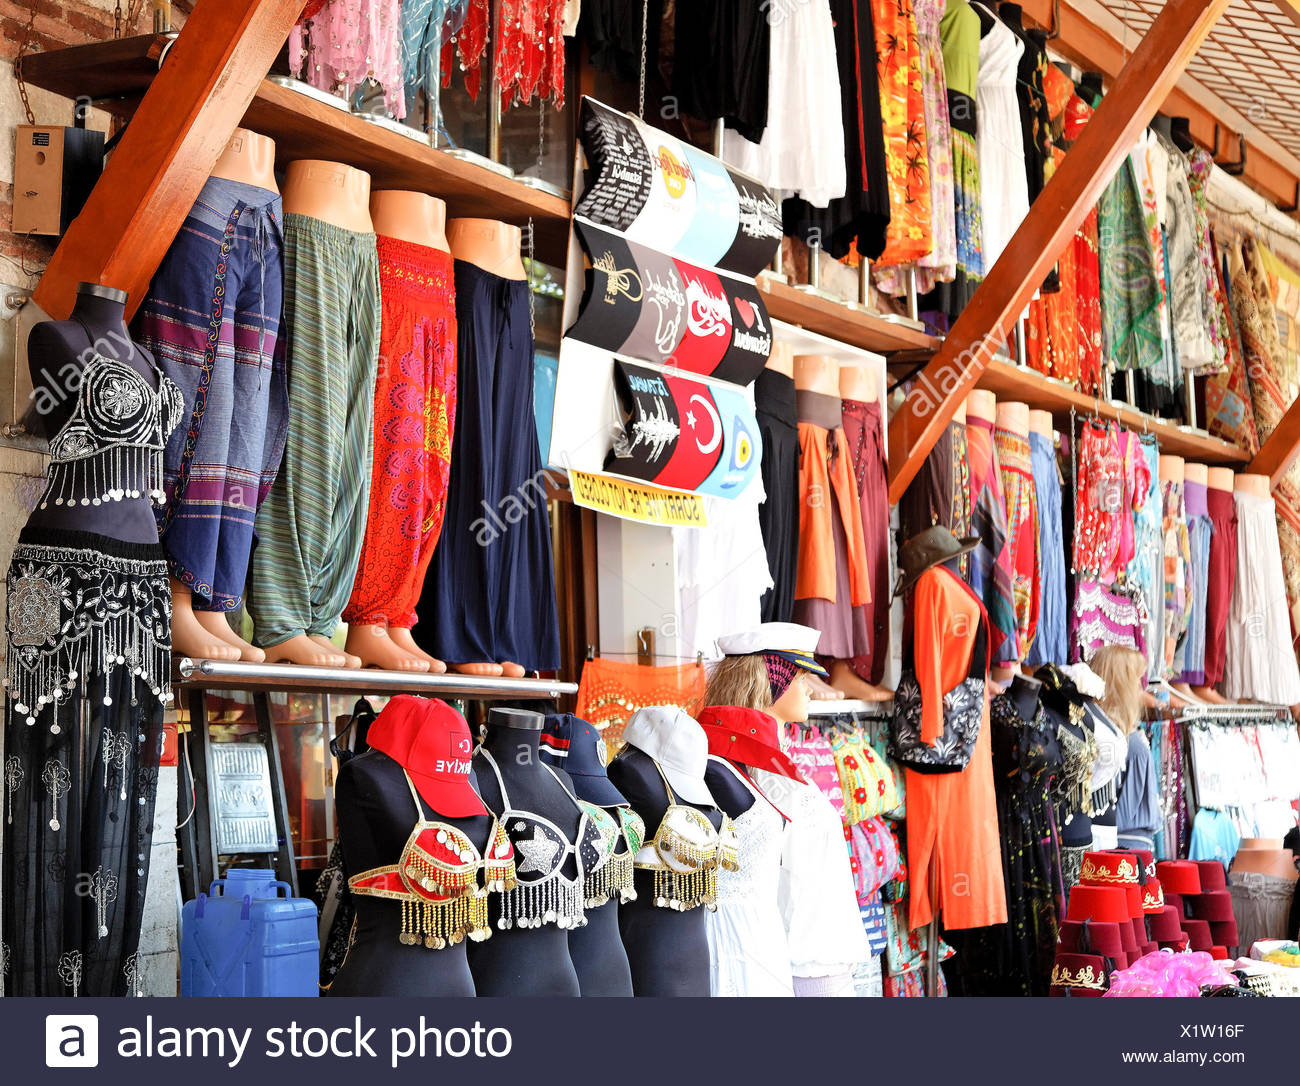 Clothes Market Stall High Resolution Stock Photography and Images - Alamy